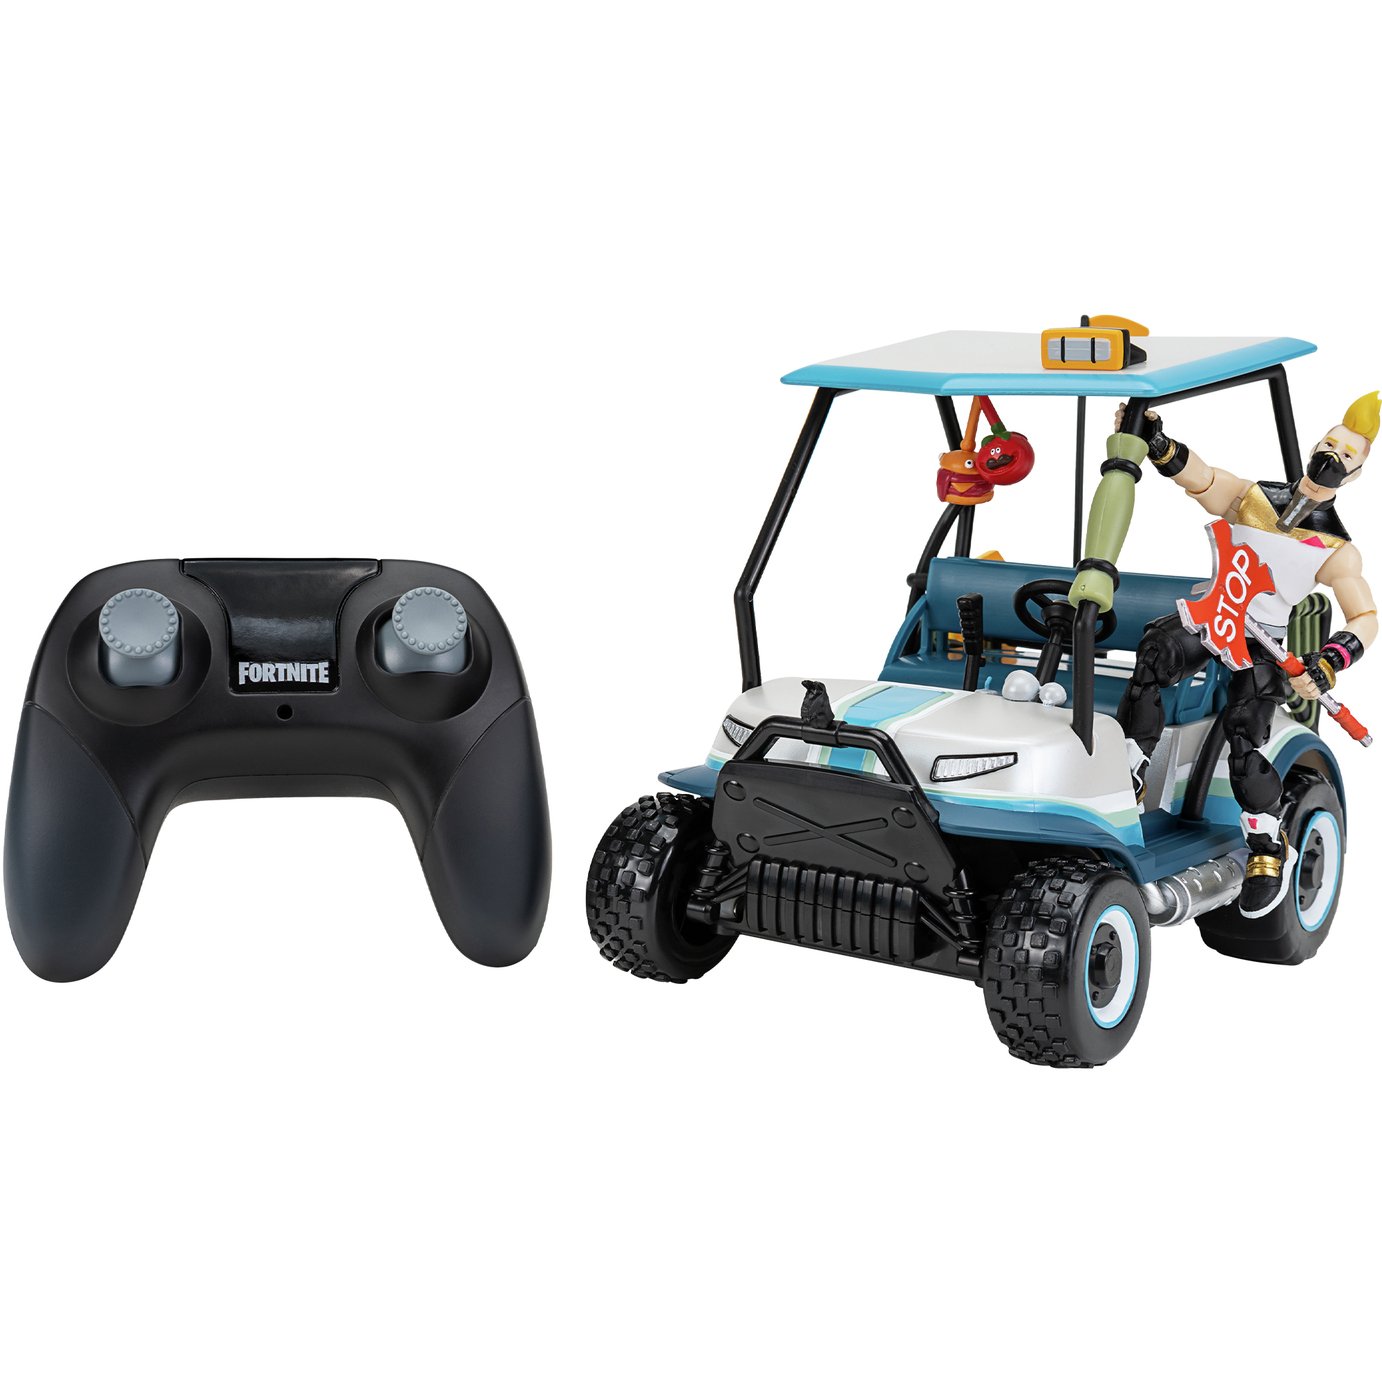 Deluxe Fortnite R/C ATK Vehicle Review